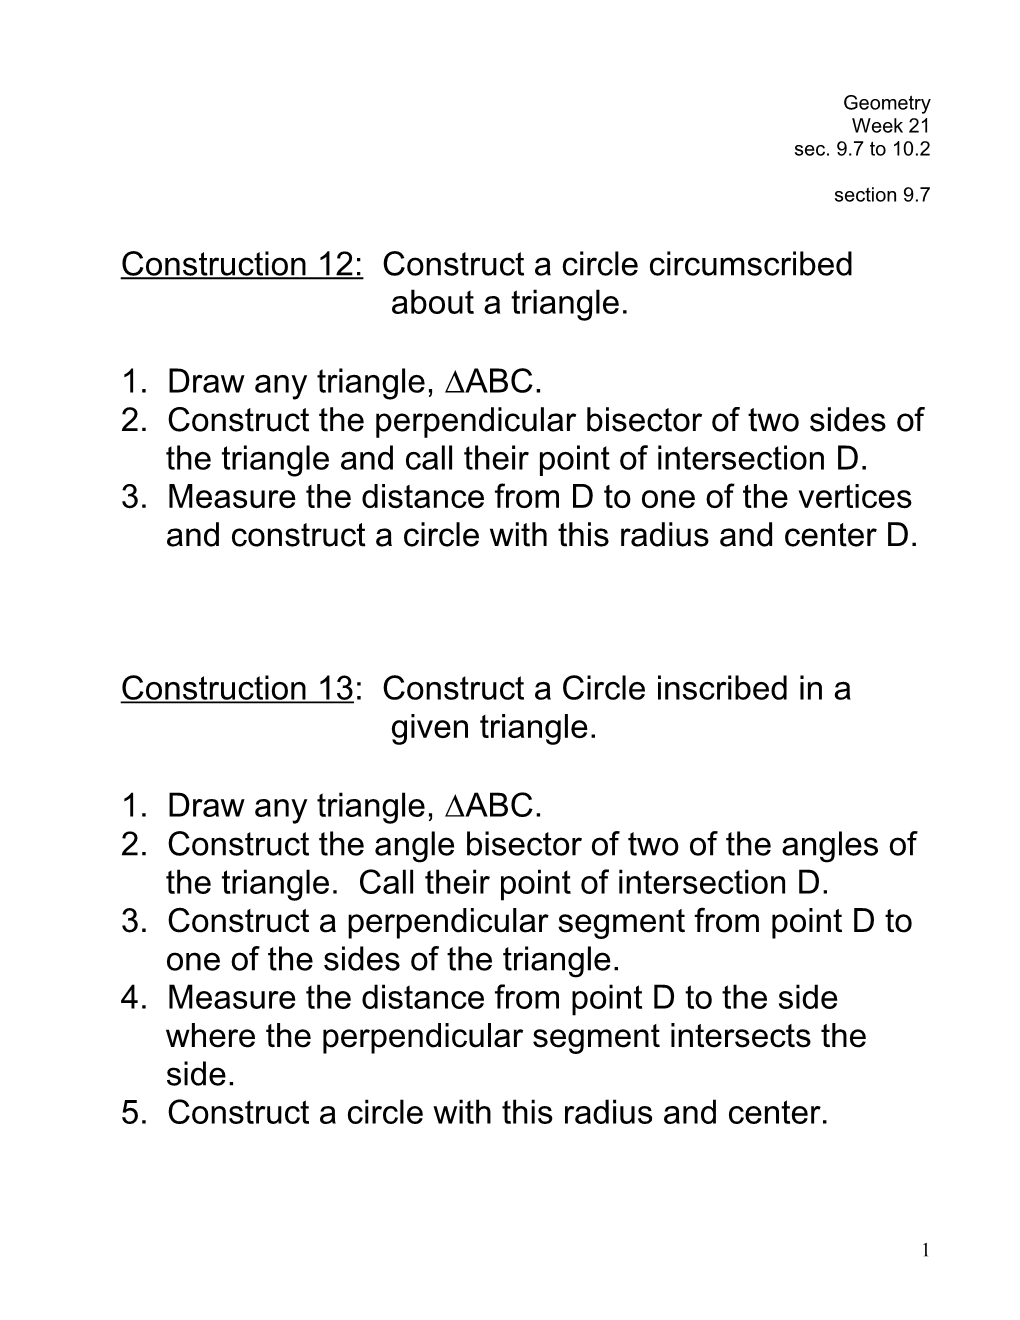 Construction 12: Construct a Circle Circumscribed About a Triangle